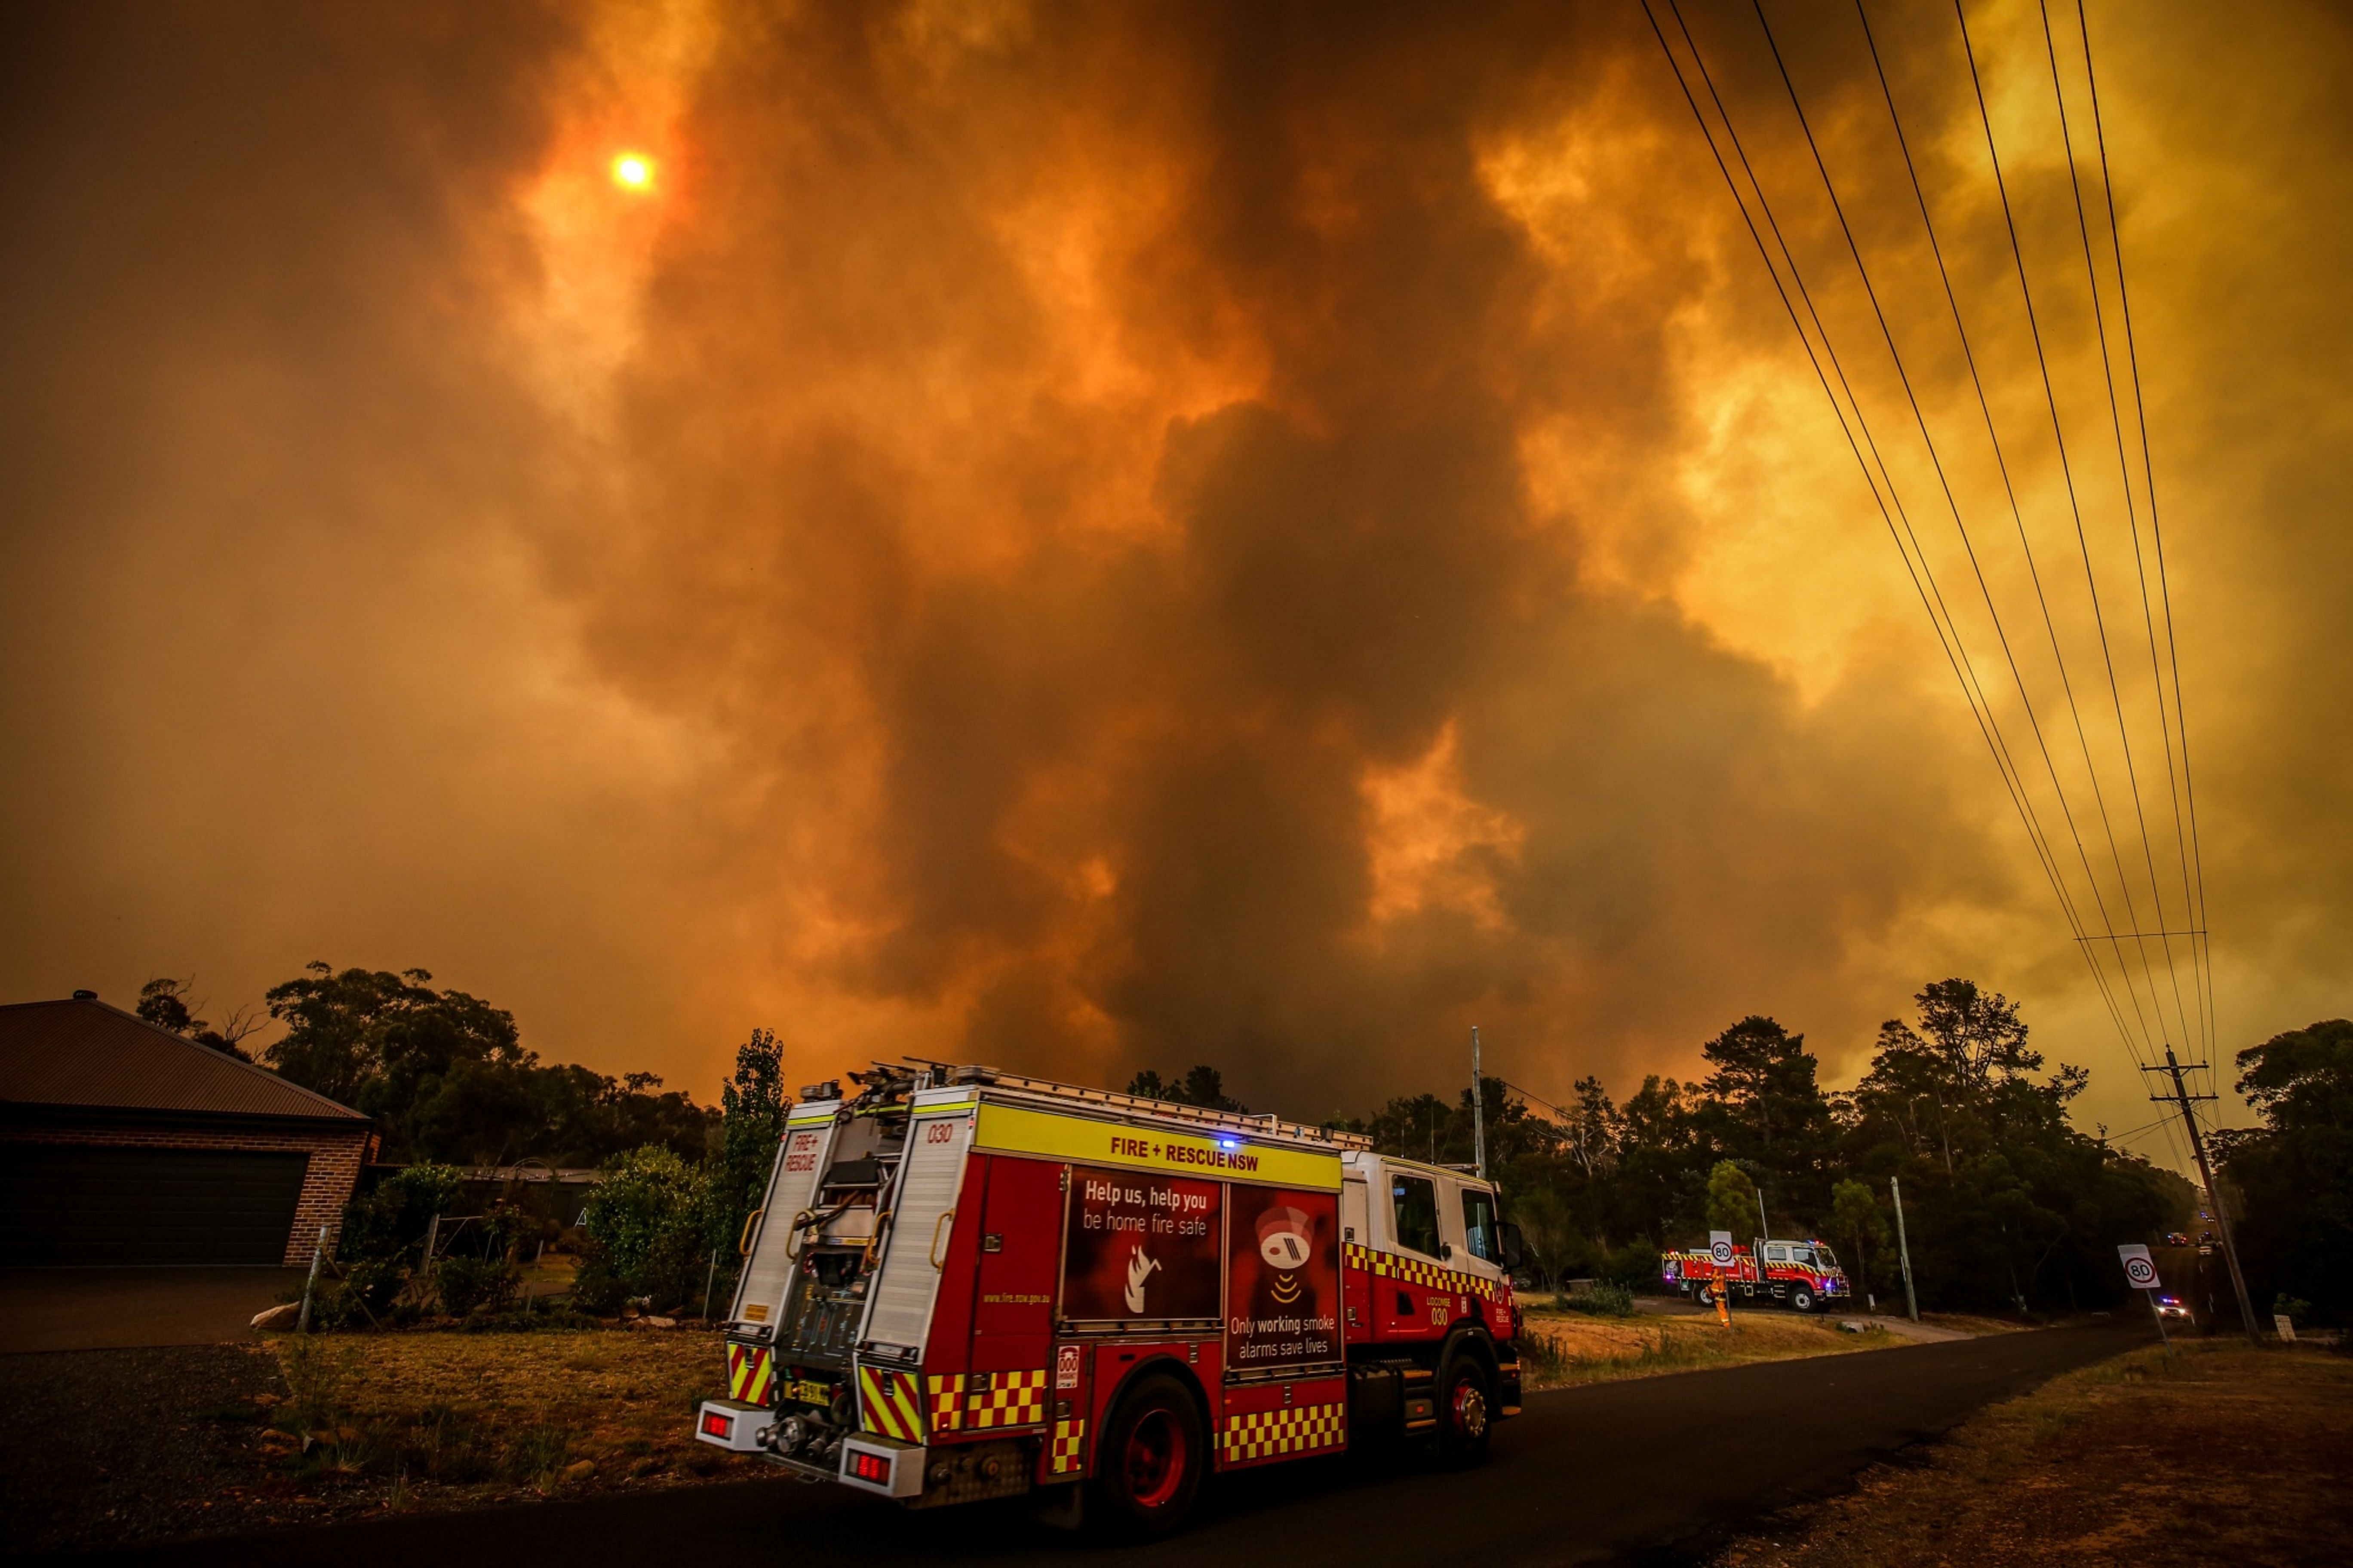 Australian bushfires likely contributed 900 million metric tons of carbon emissions, according to early estimates from scientists behind the Global Fire Emissions Database. Credit: Bloomberg